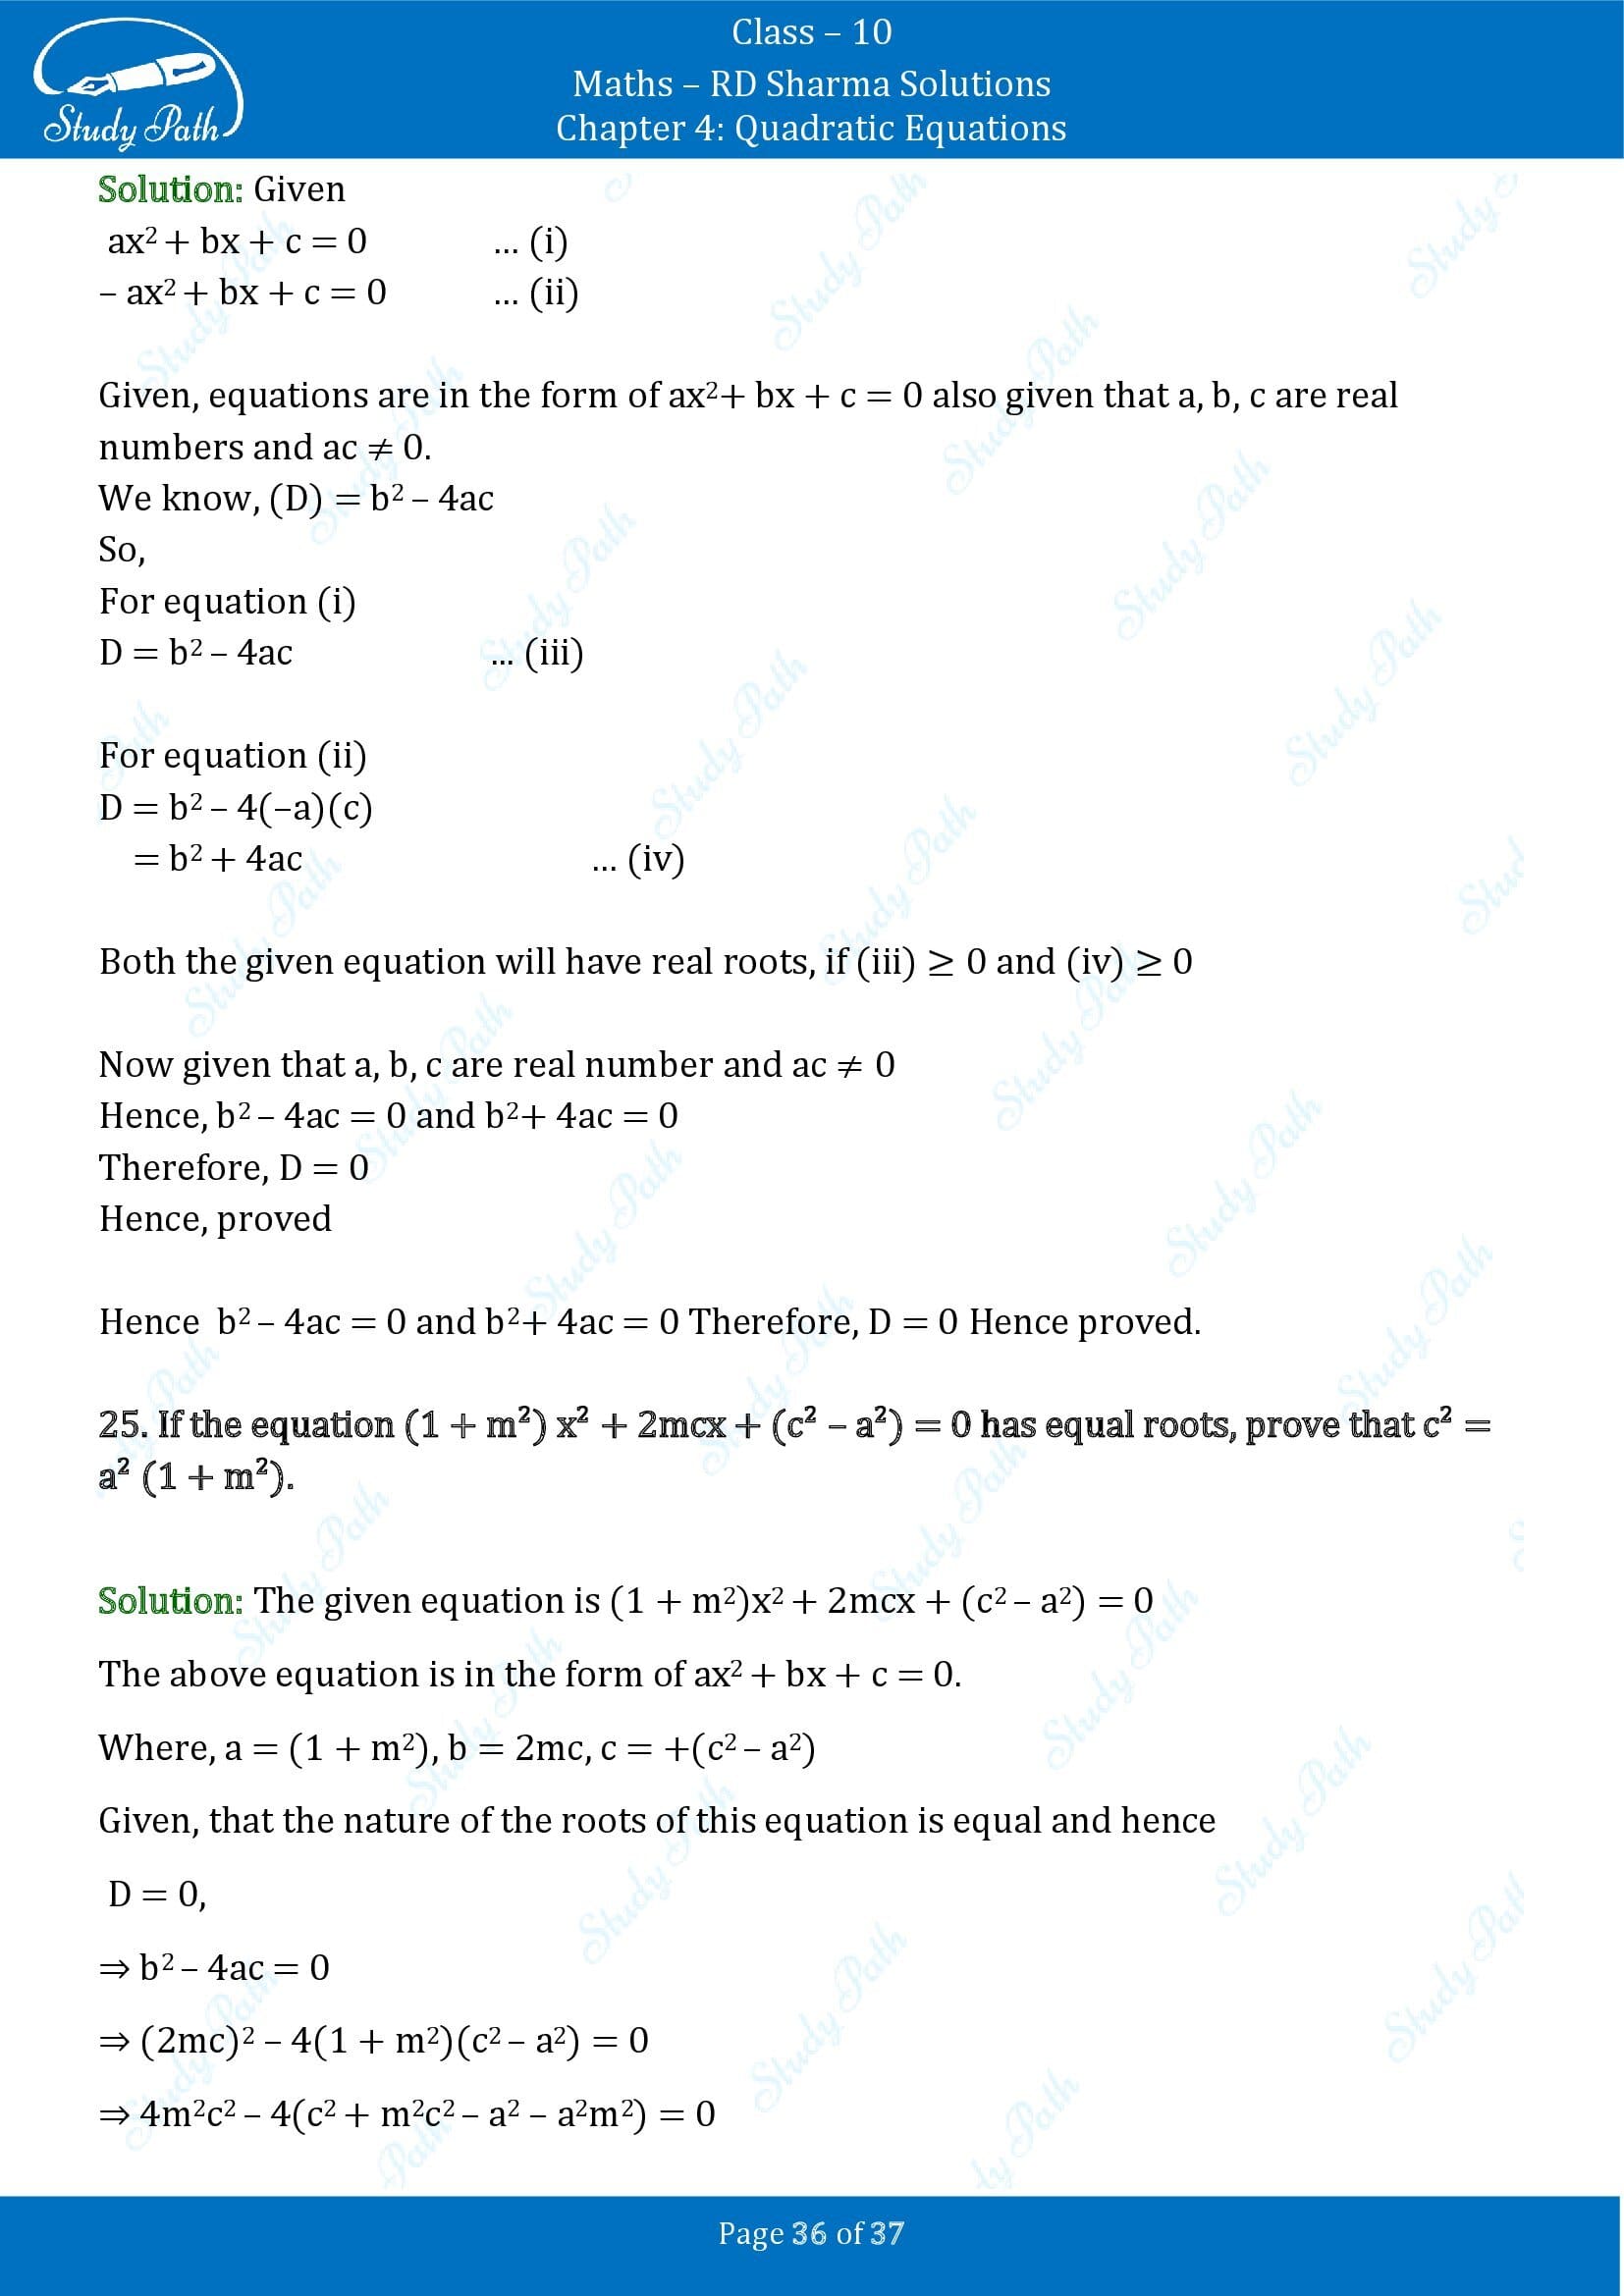 RD Sharma Solutions Class 10 Chapter 4 Quadratic Equations Exercise 4.6 00036